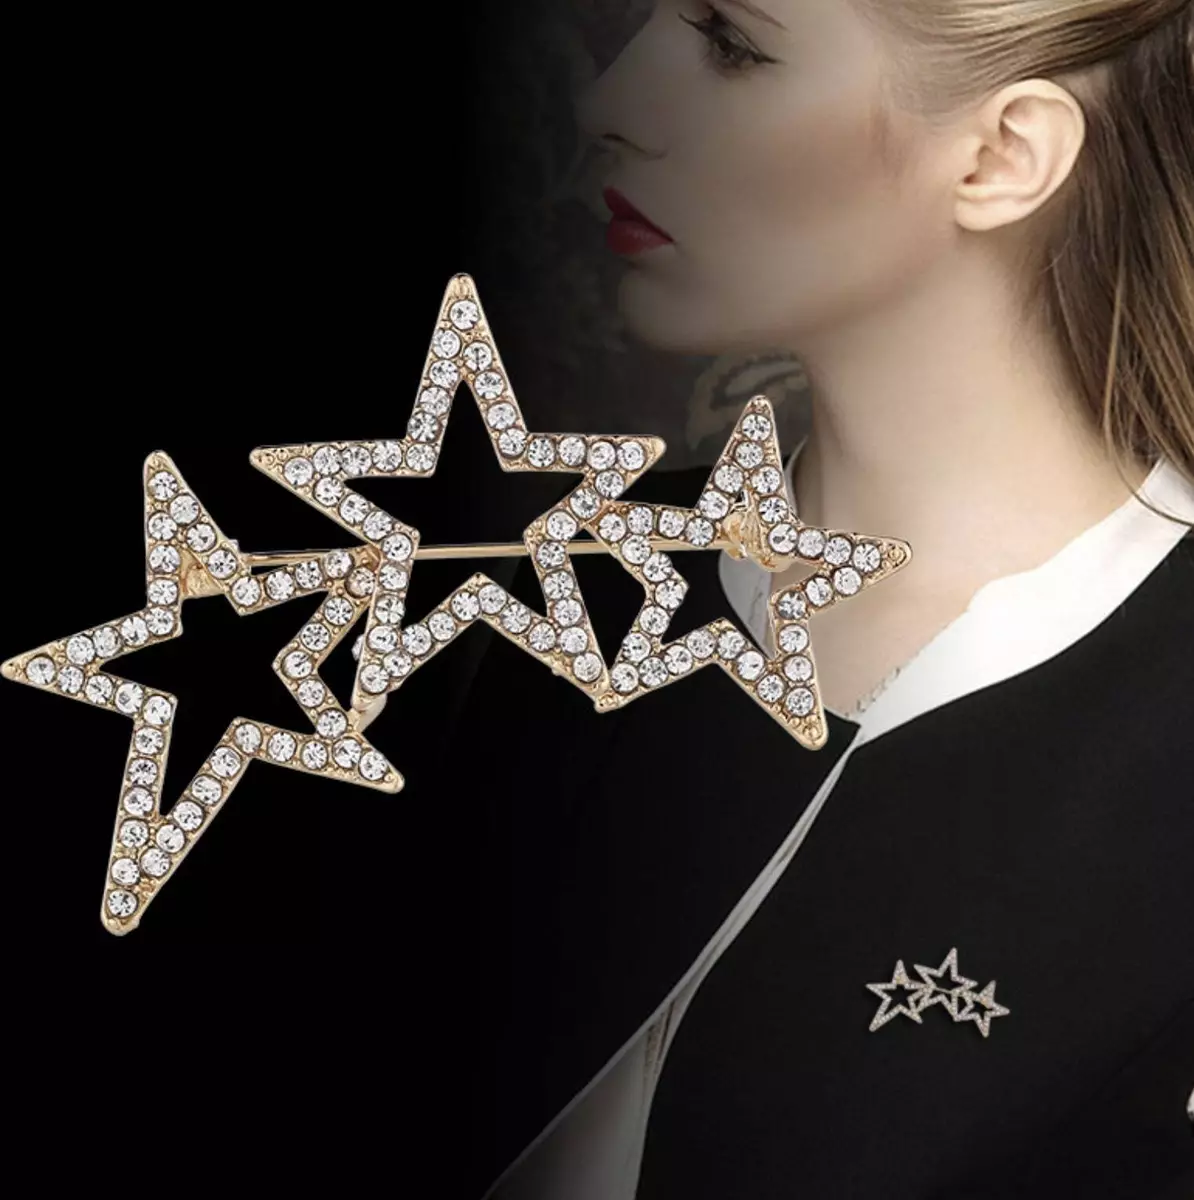 Get the perfect look for special occasions and be the star of the party!